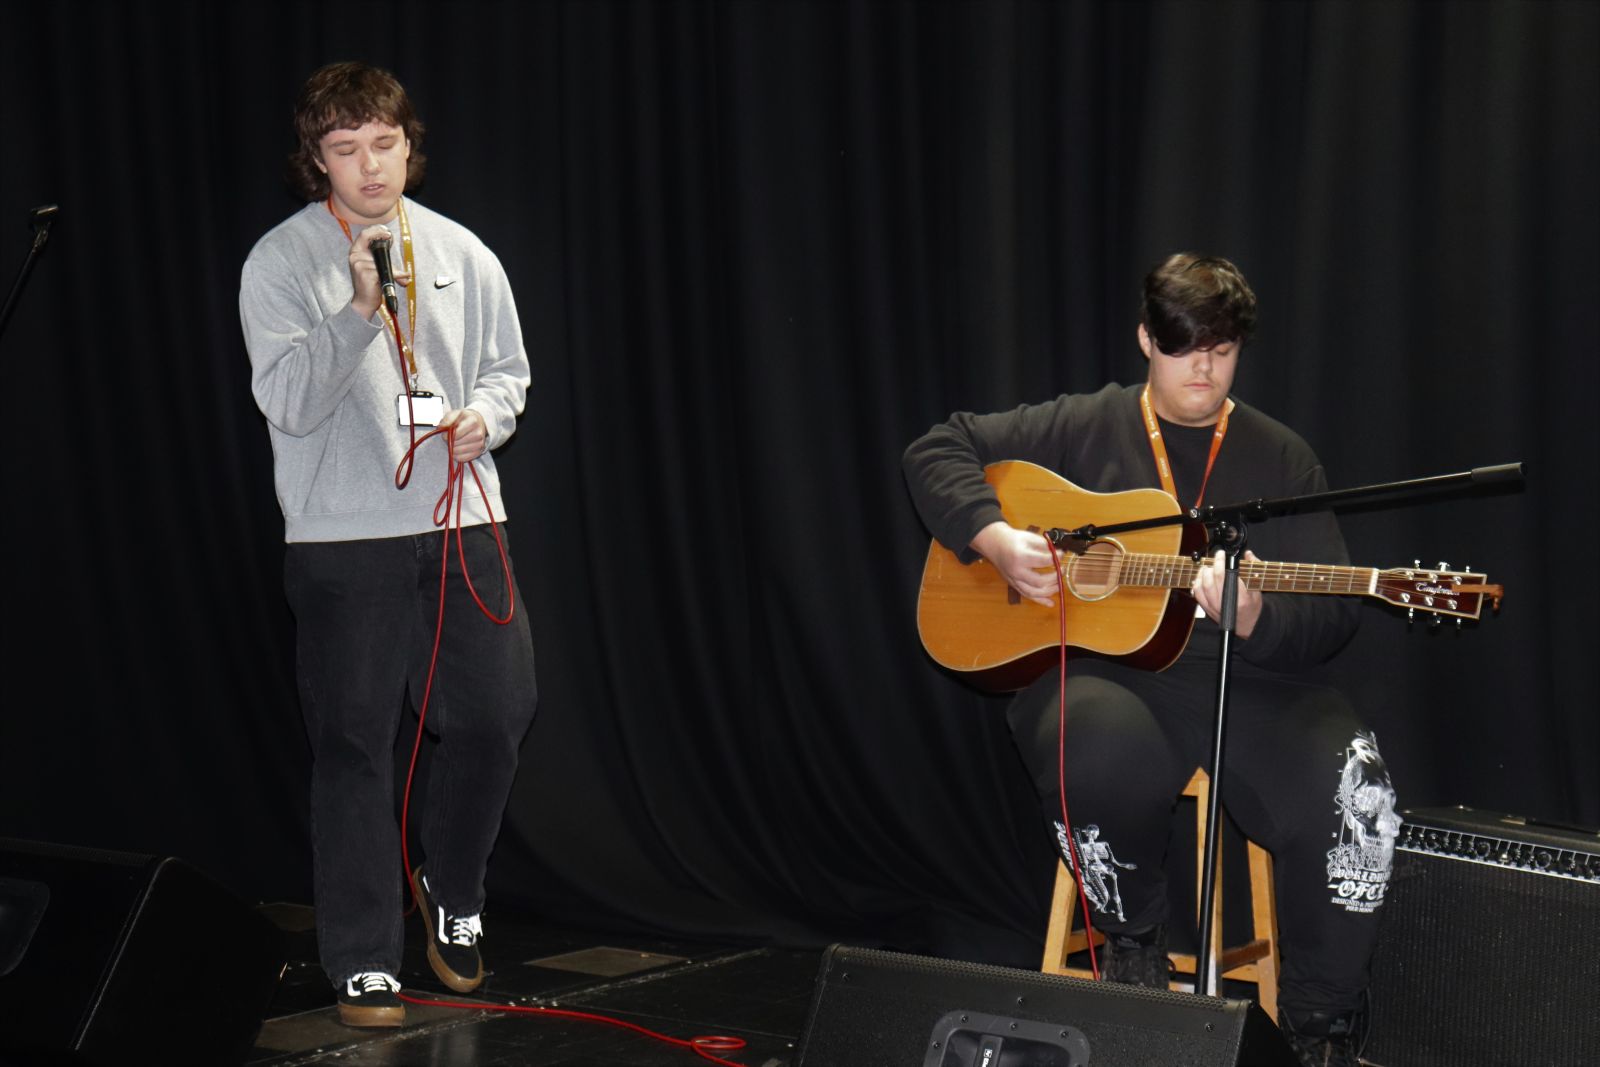 Toby and Ben performing 'Everlong